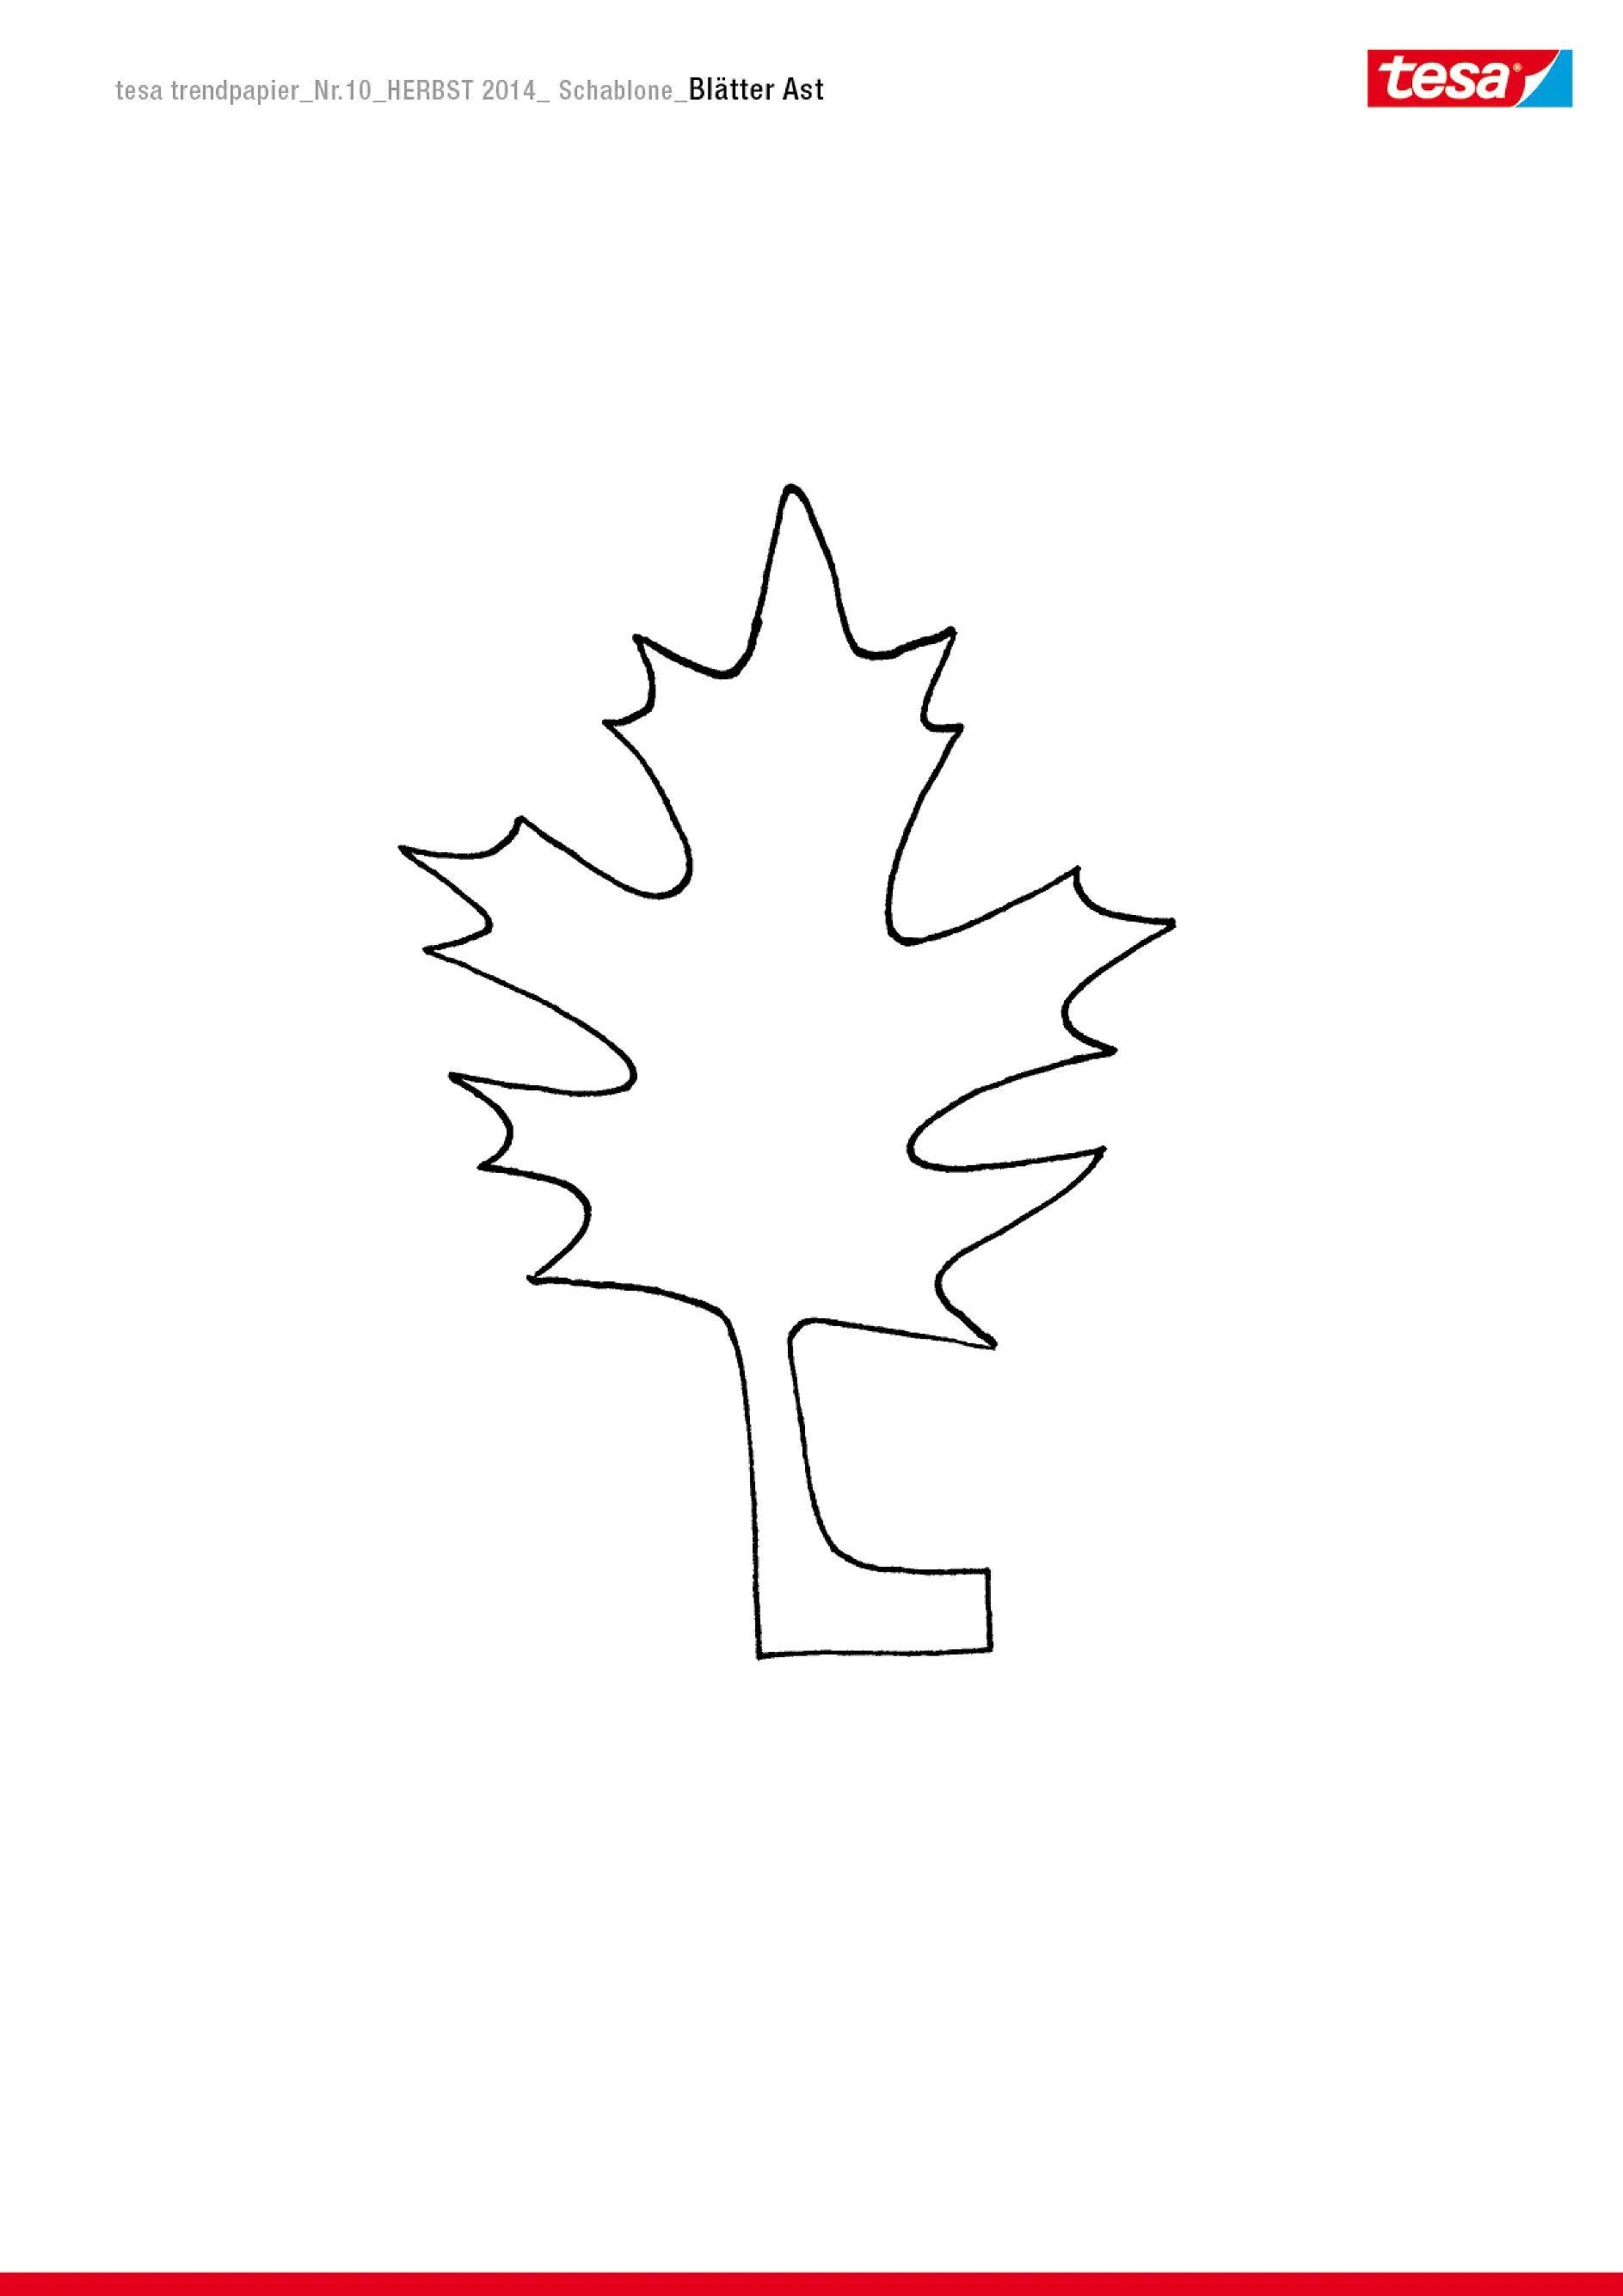 Download here the template for your leaves.